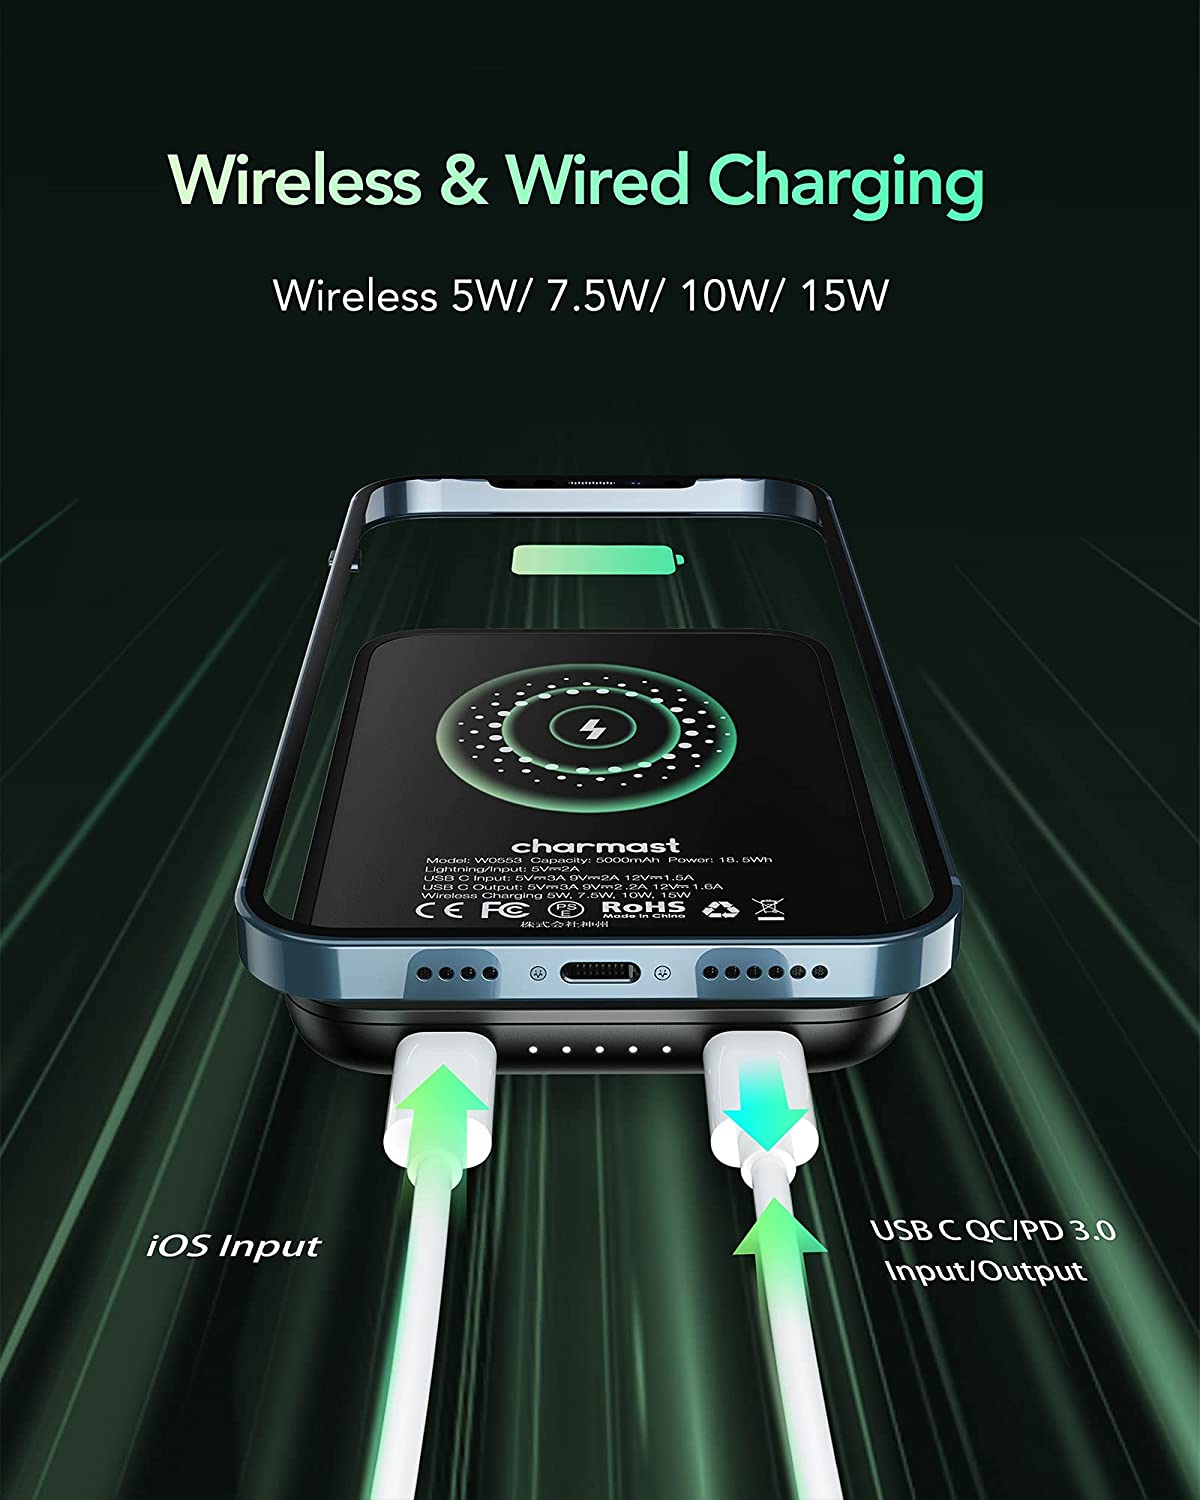 Magnetic Bank Wireless Portable Charger Batter – Now in the Box